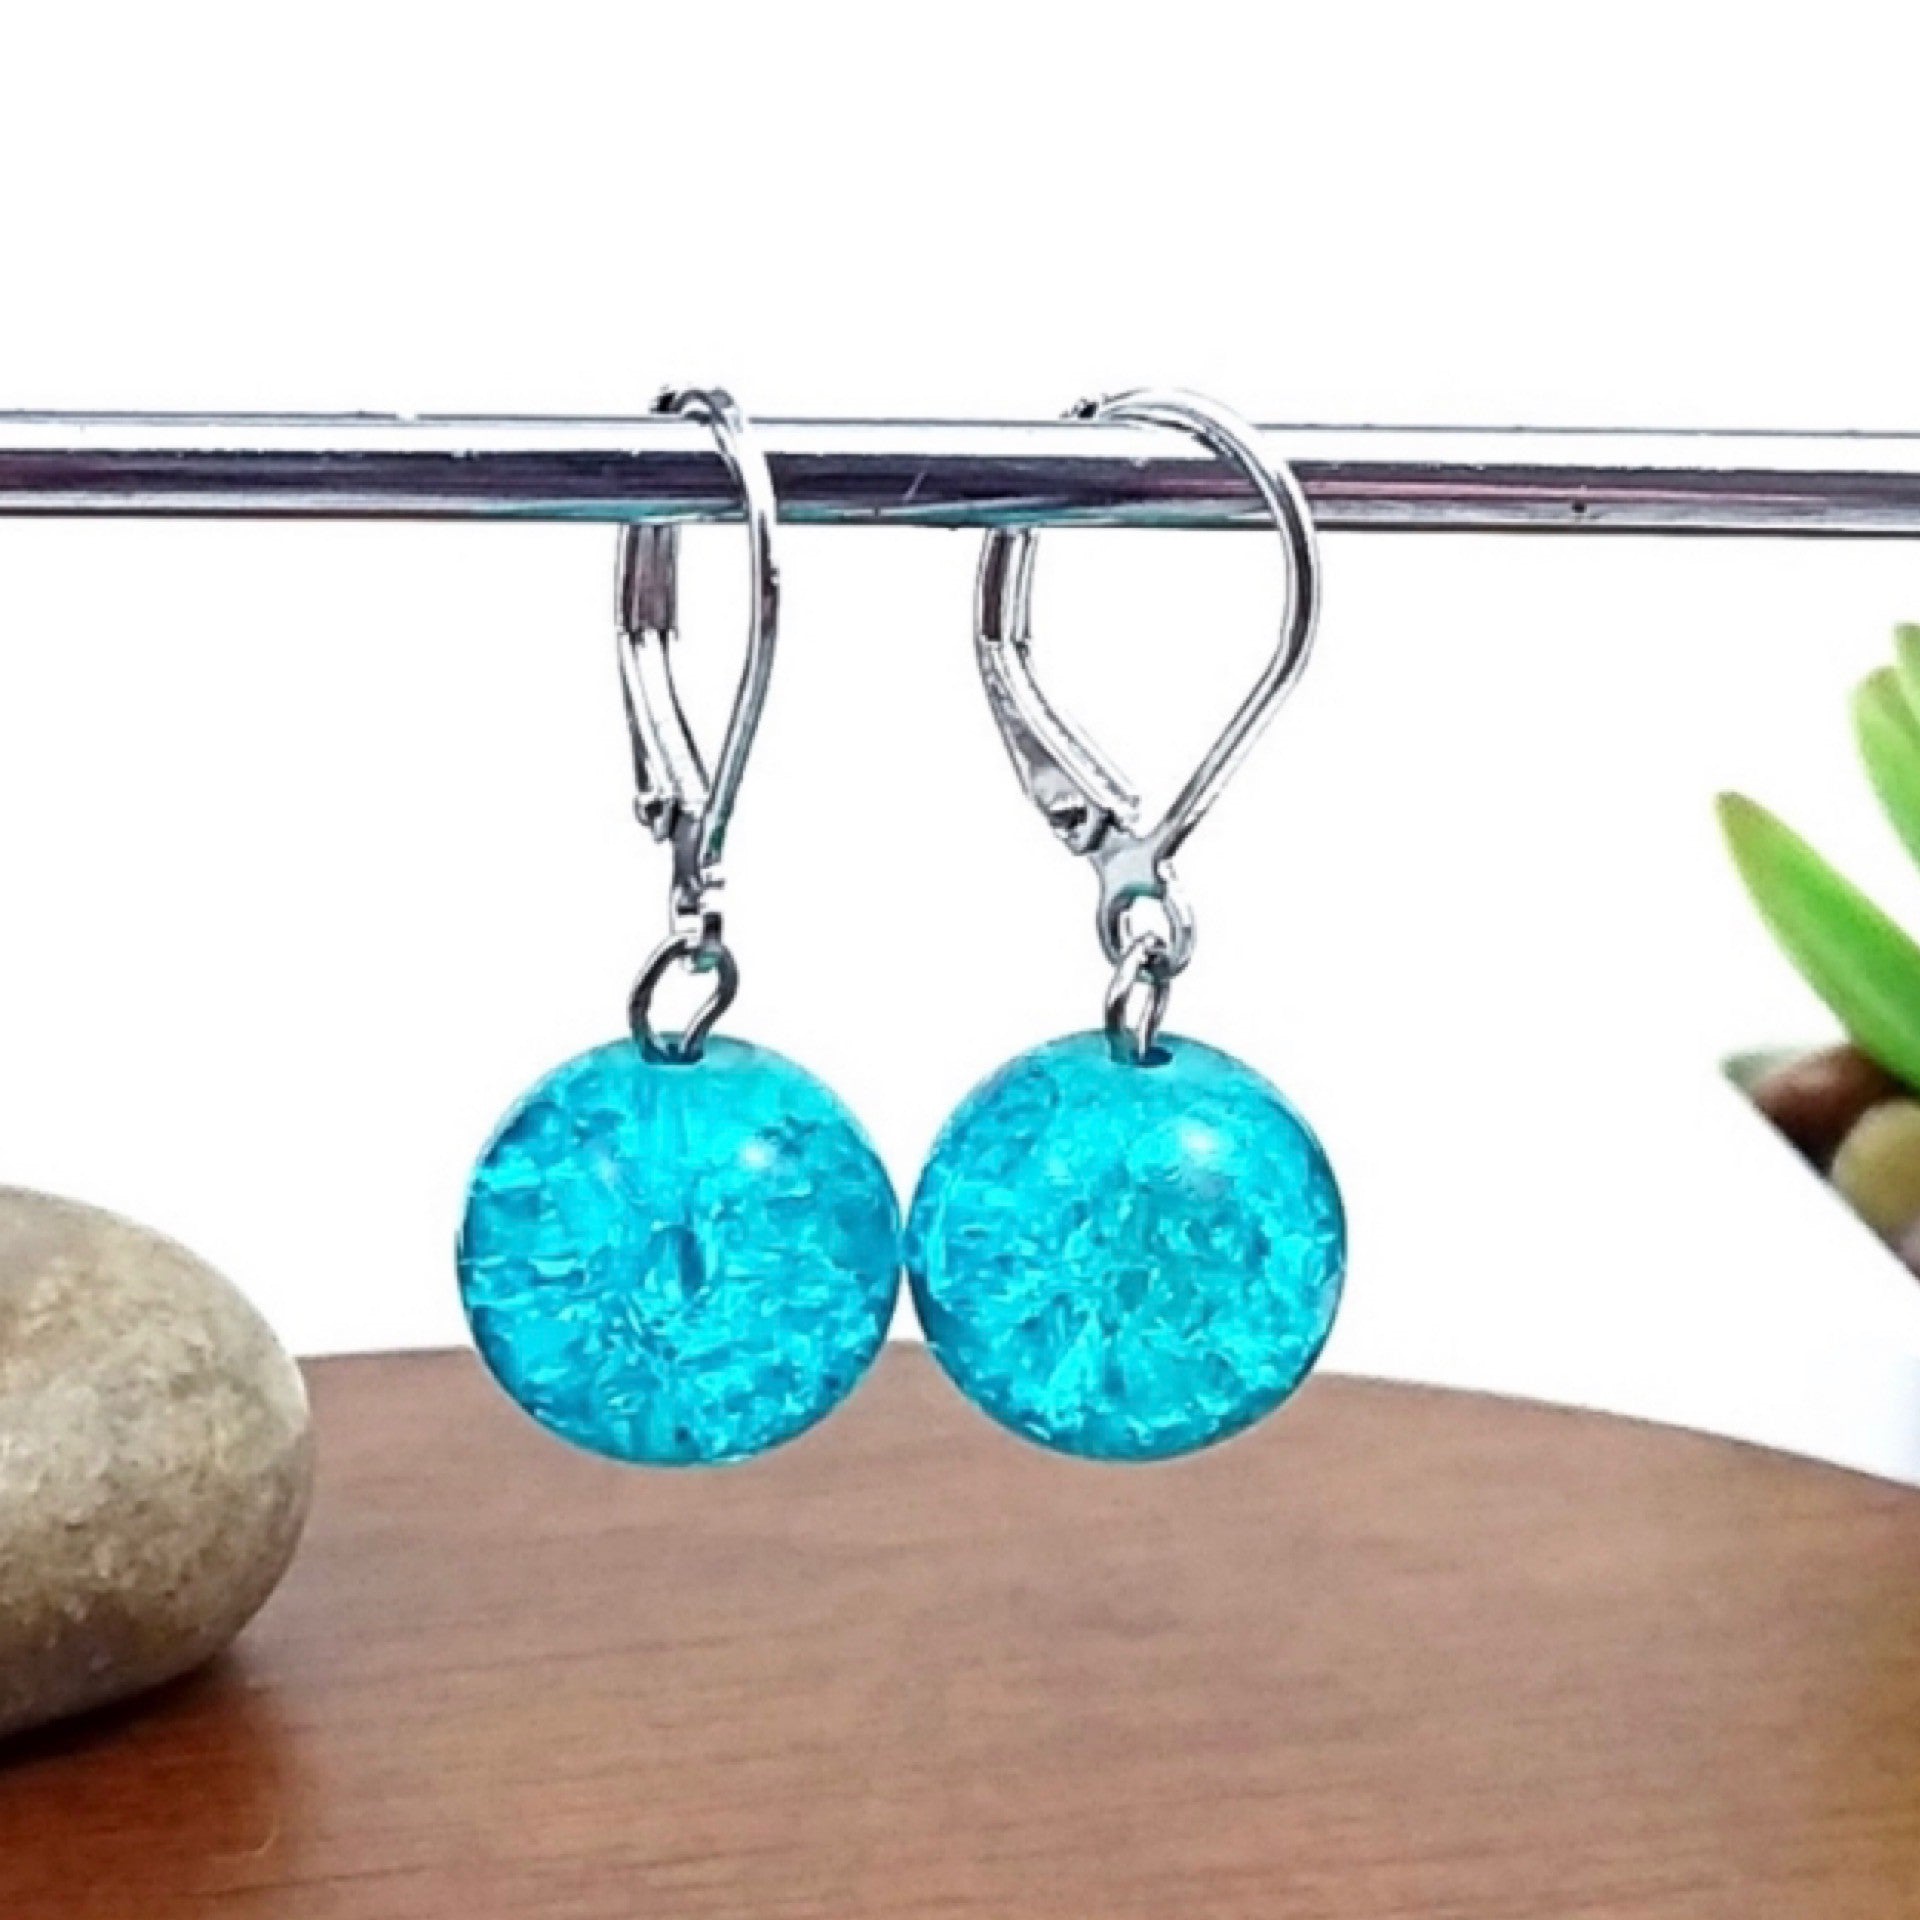 Turquoise crackle glass earrings